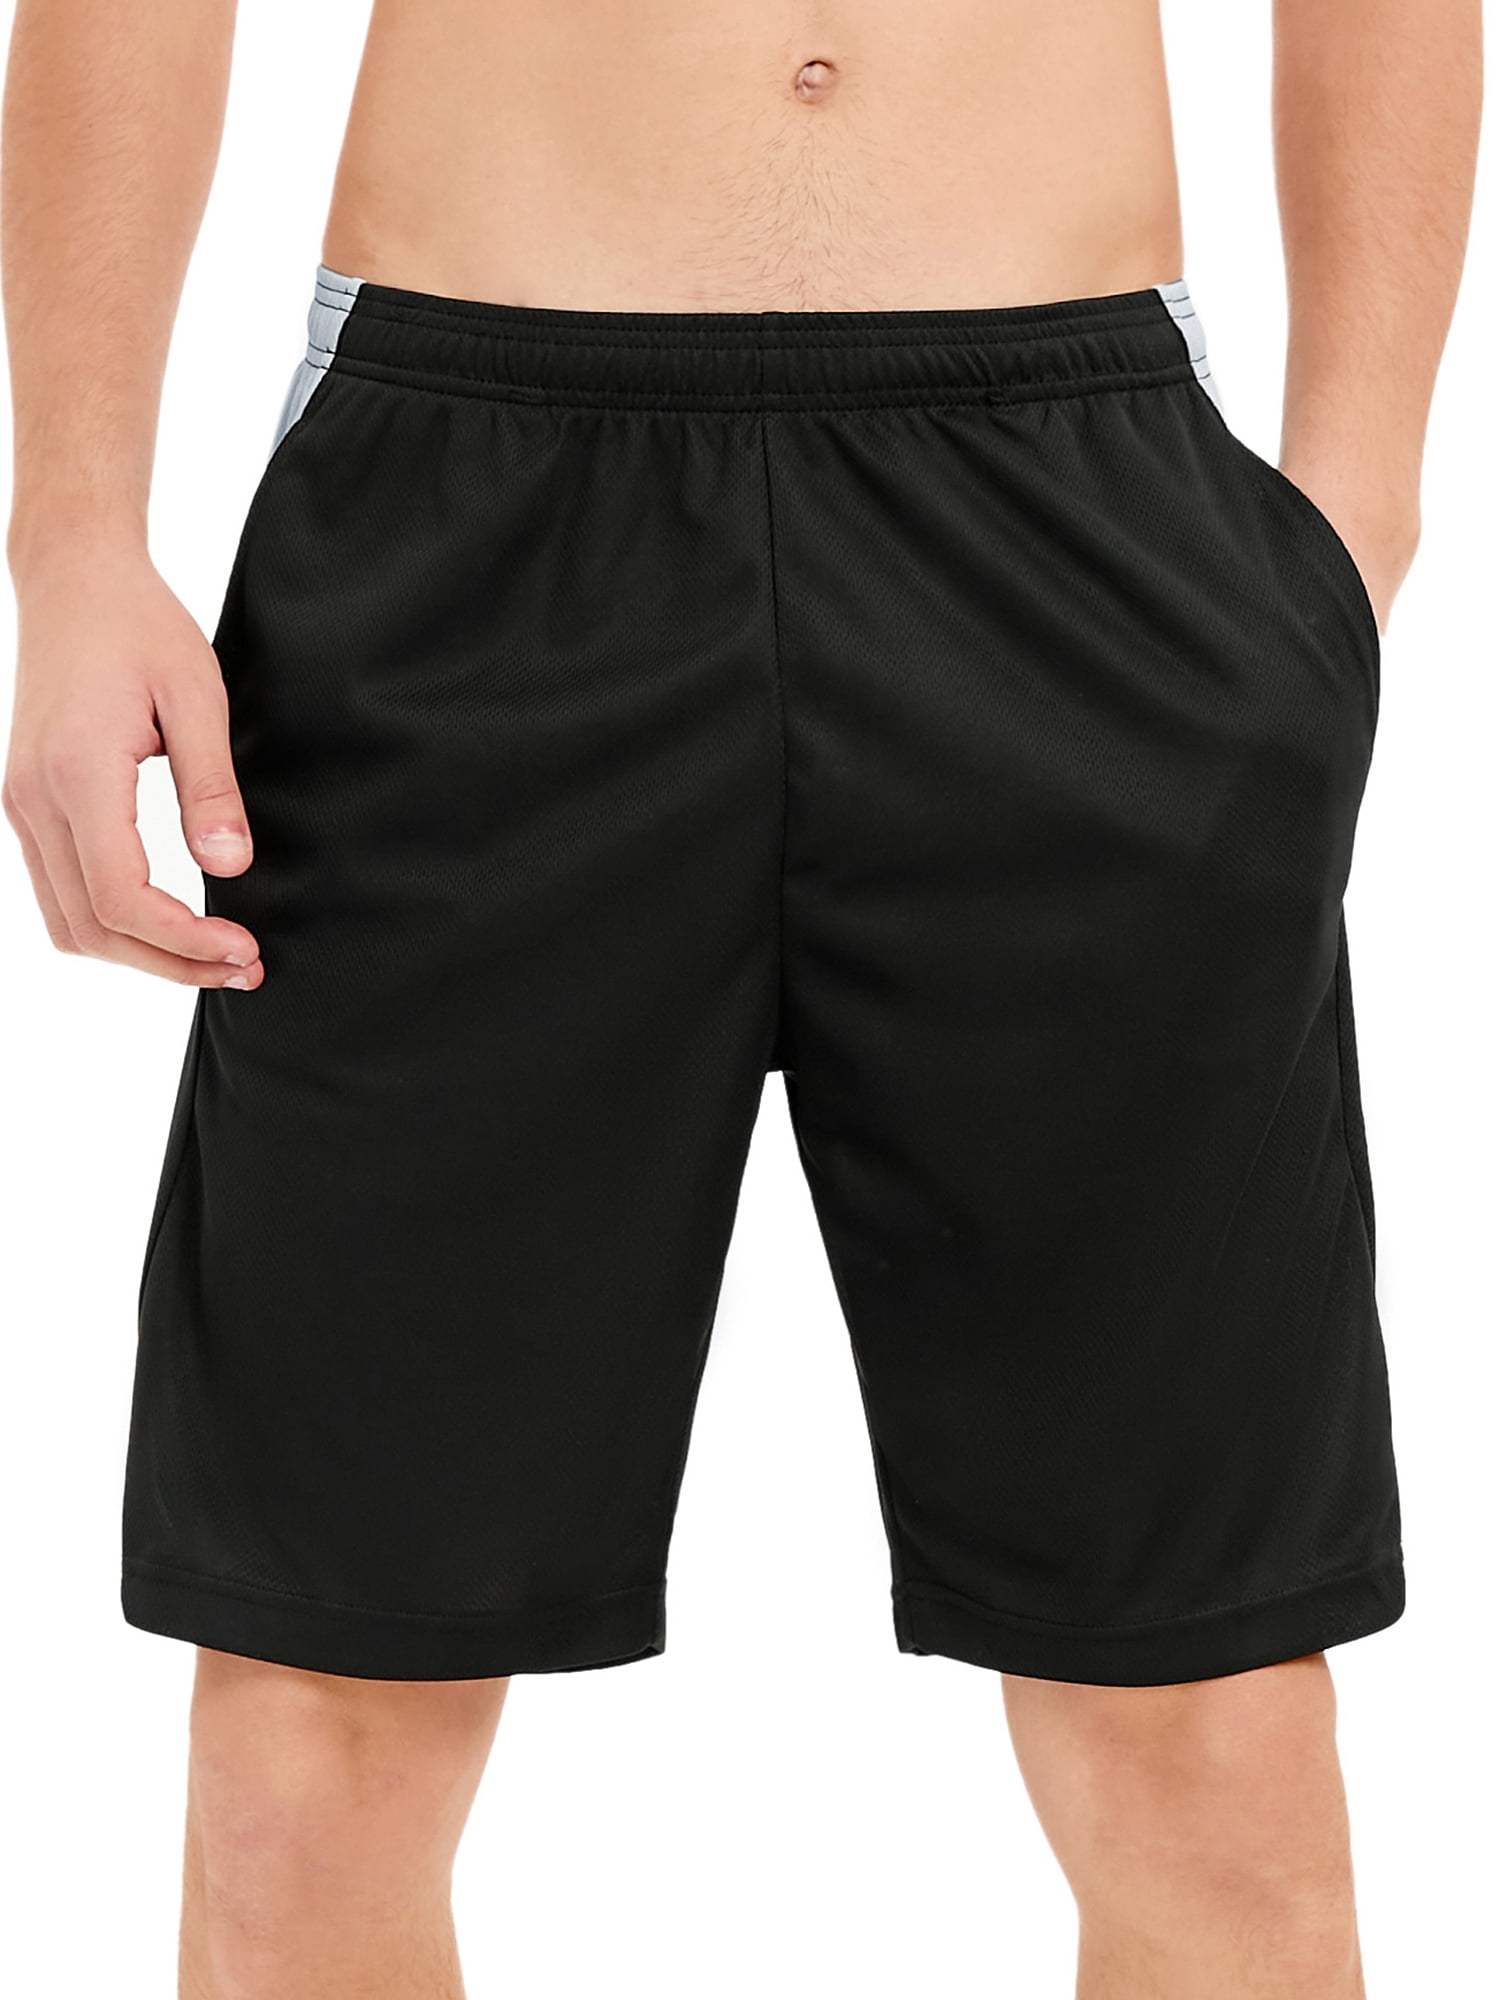 FOCUSSEXY Men's Running Shorts Quick Dry Workout Sports Athletic